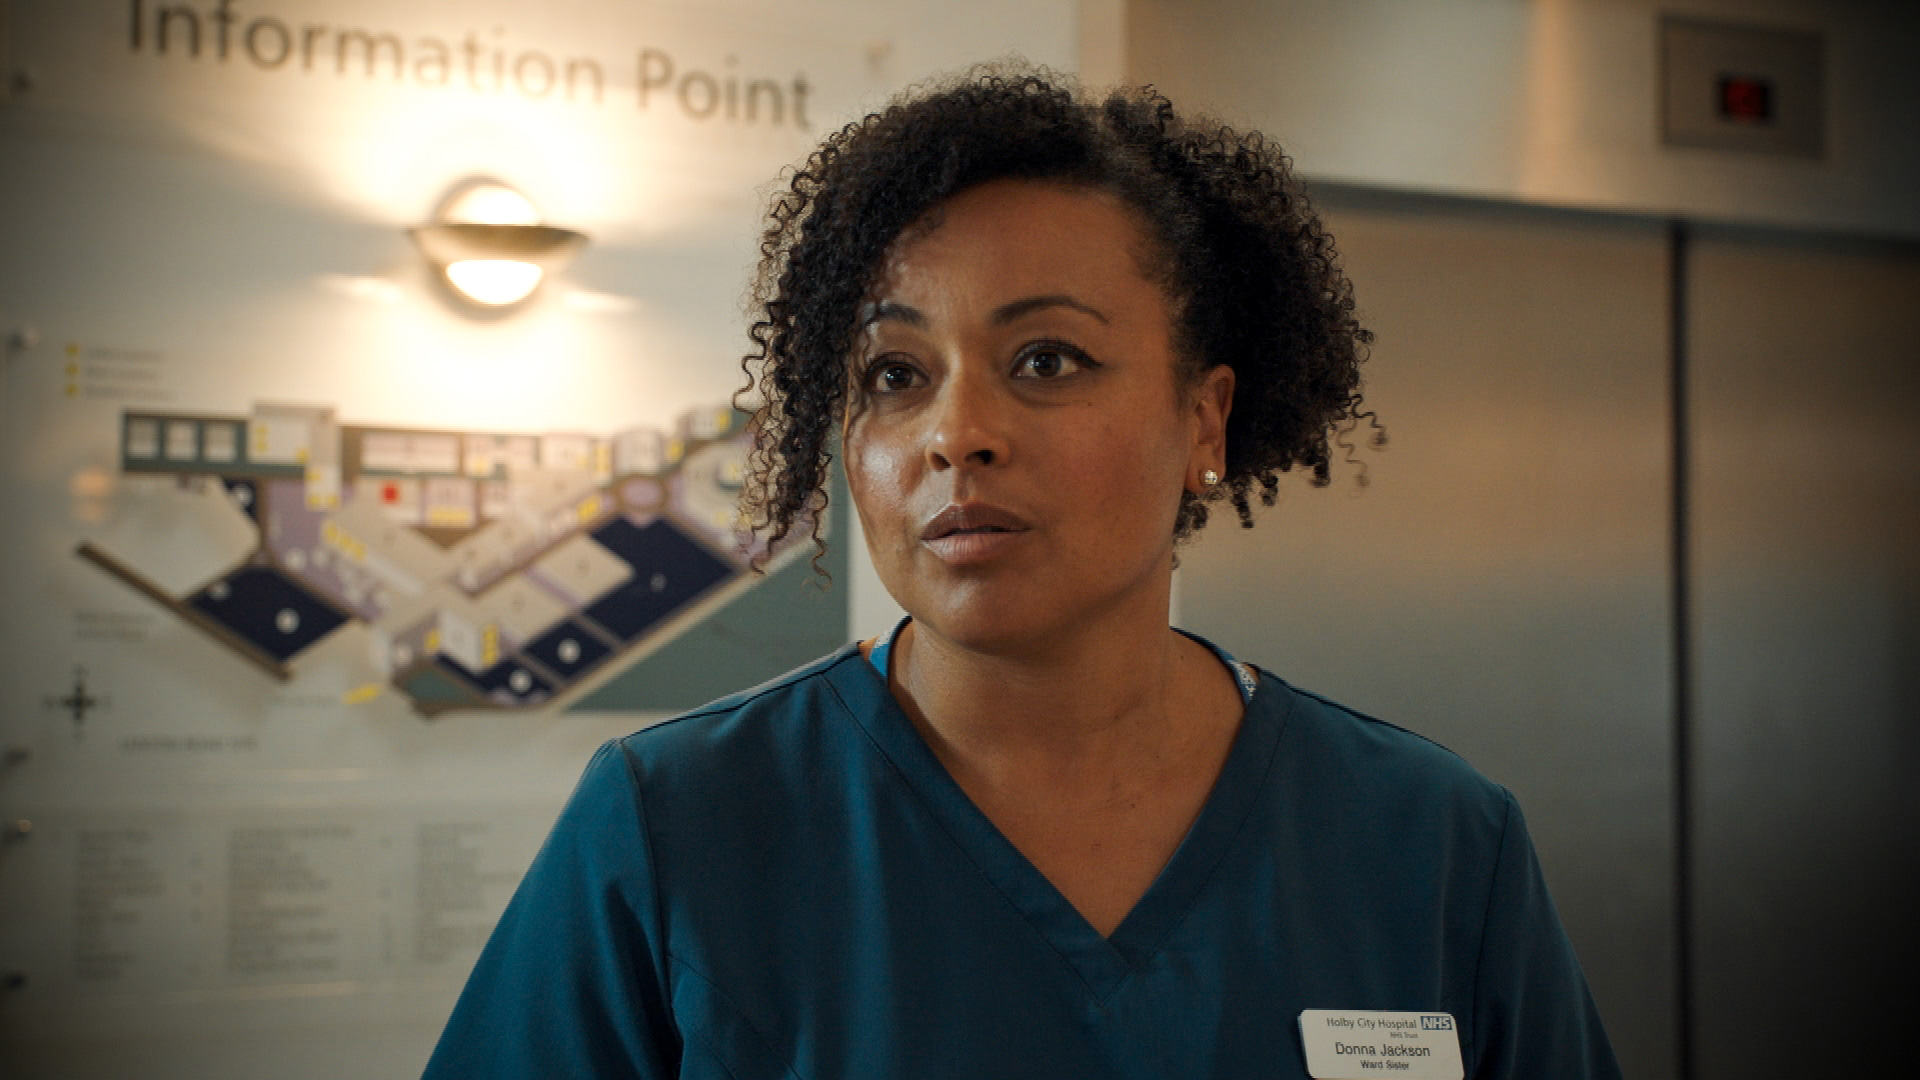 Pay rise surprise. Donna is shocked when she finds out what her dedication is worth to the hospital...